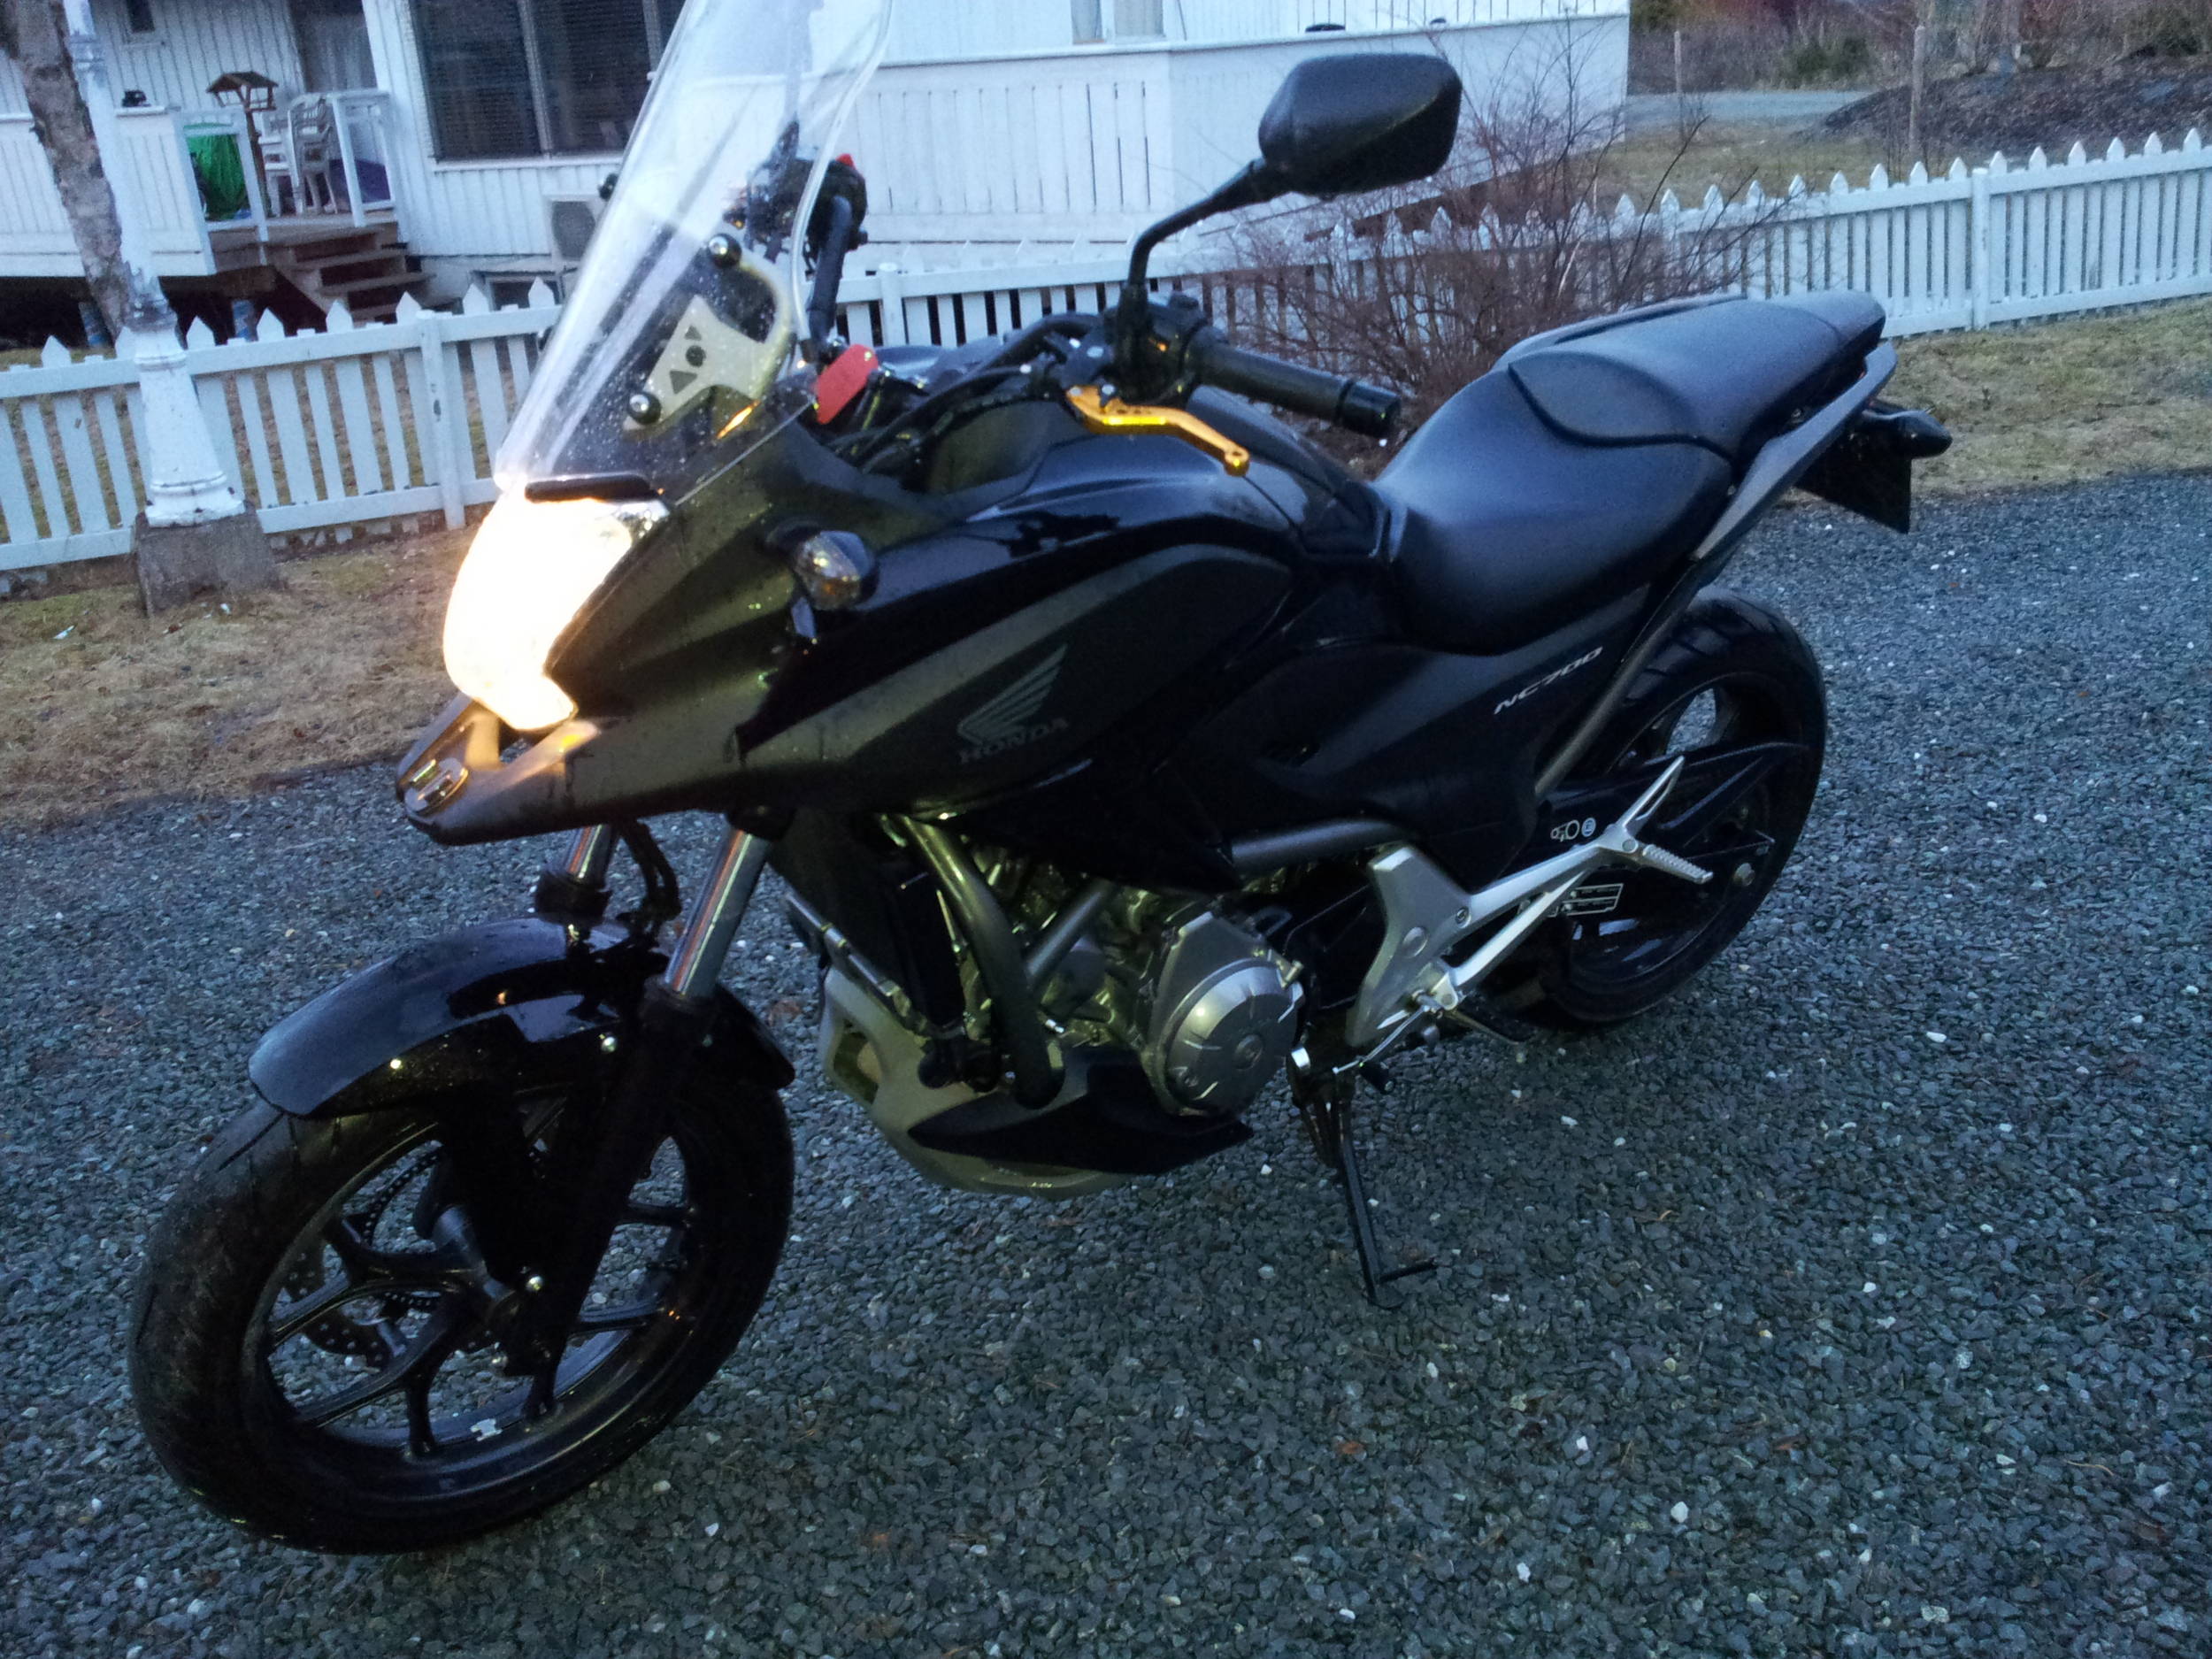 Just bought the NC700X